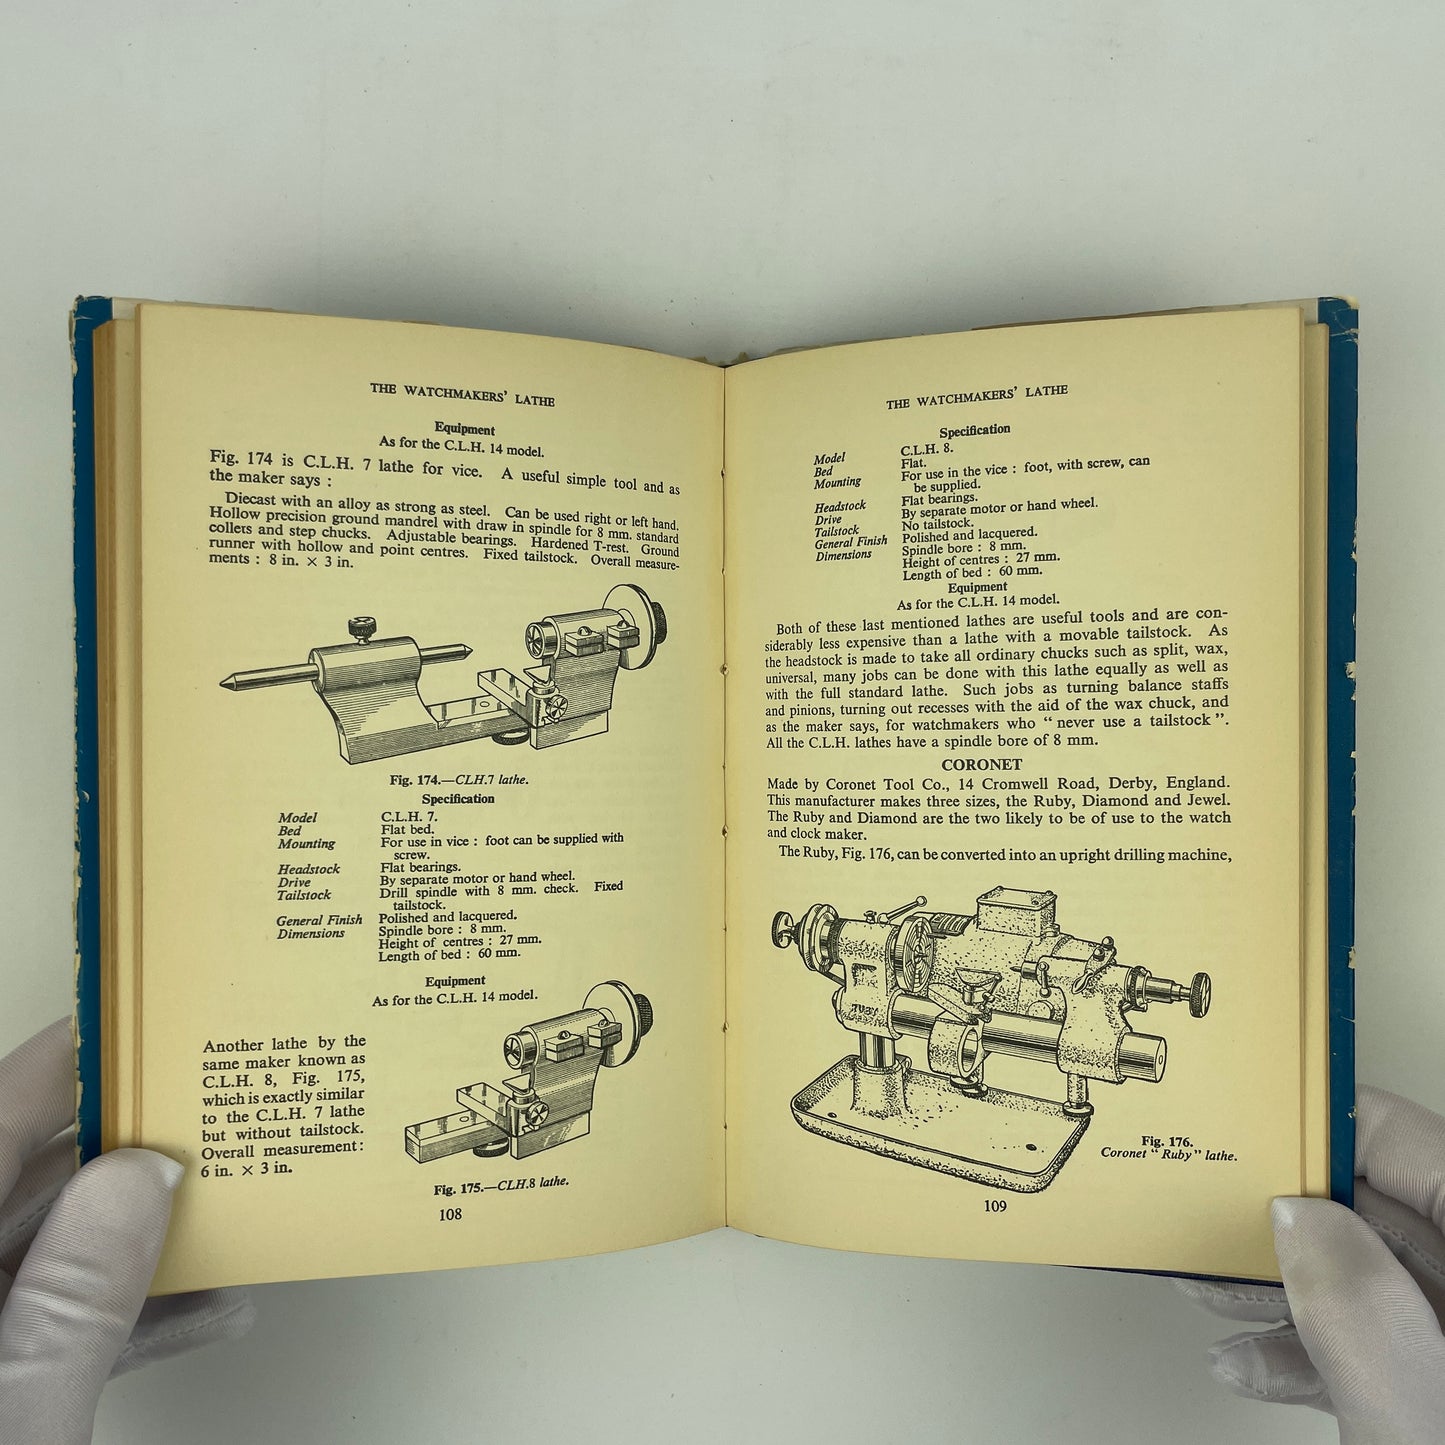 Lot 85- The Watchmakers Lathe and How to Use It Book